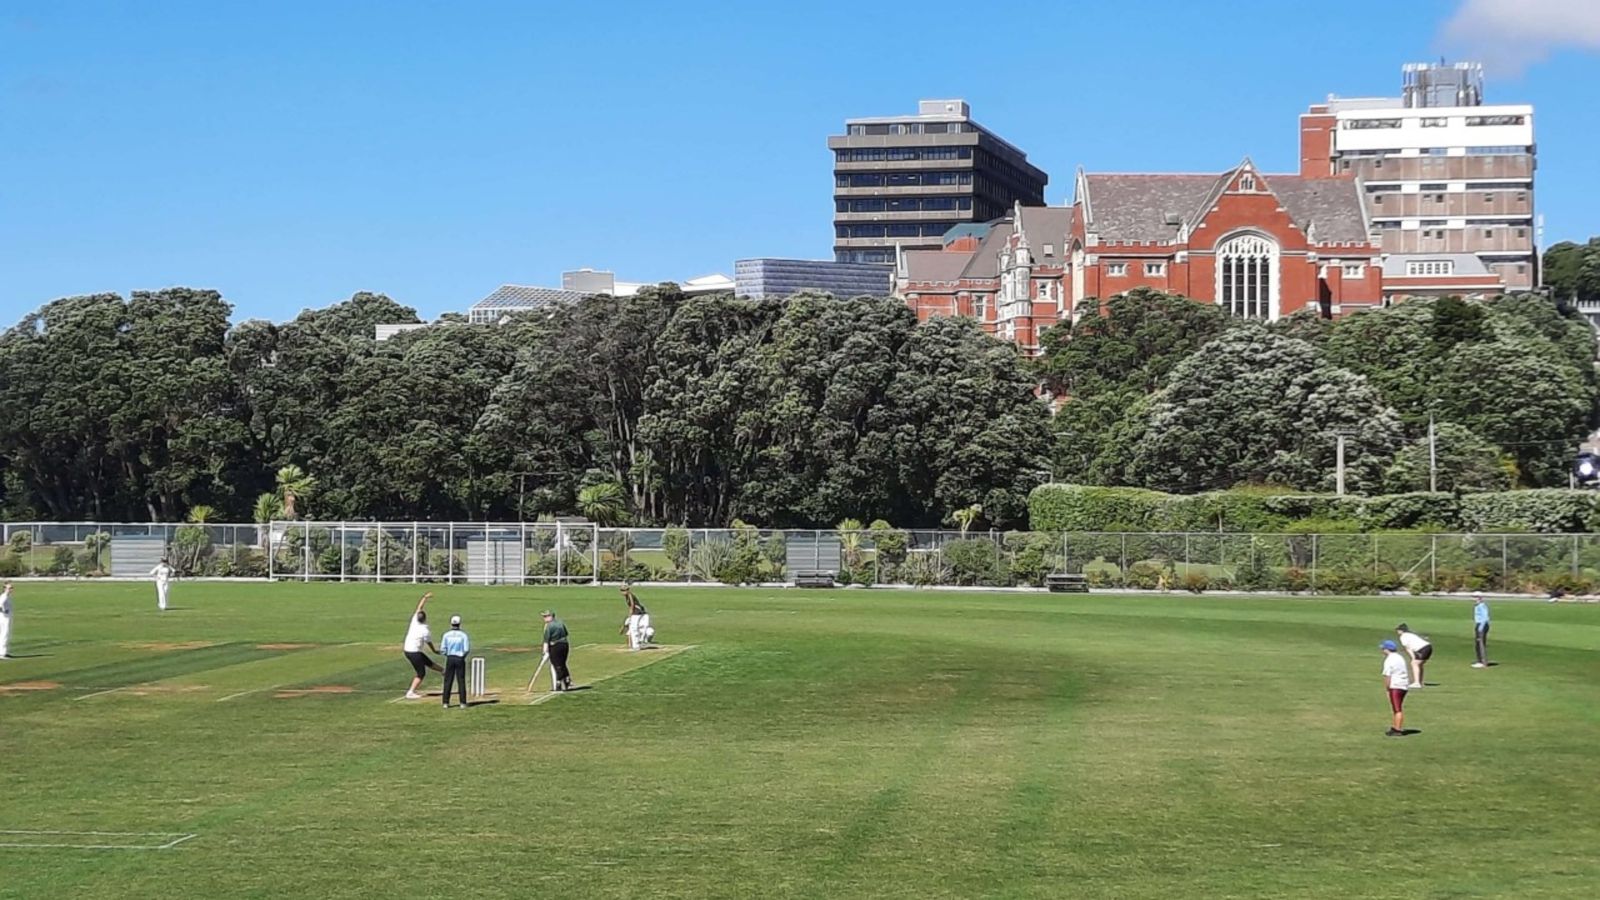 Cricket field and players in Kelburn park, with Hunter building in the background.